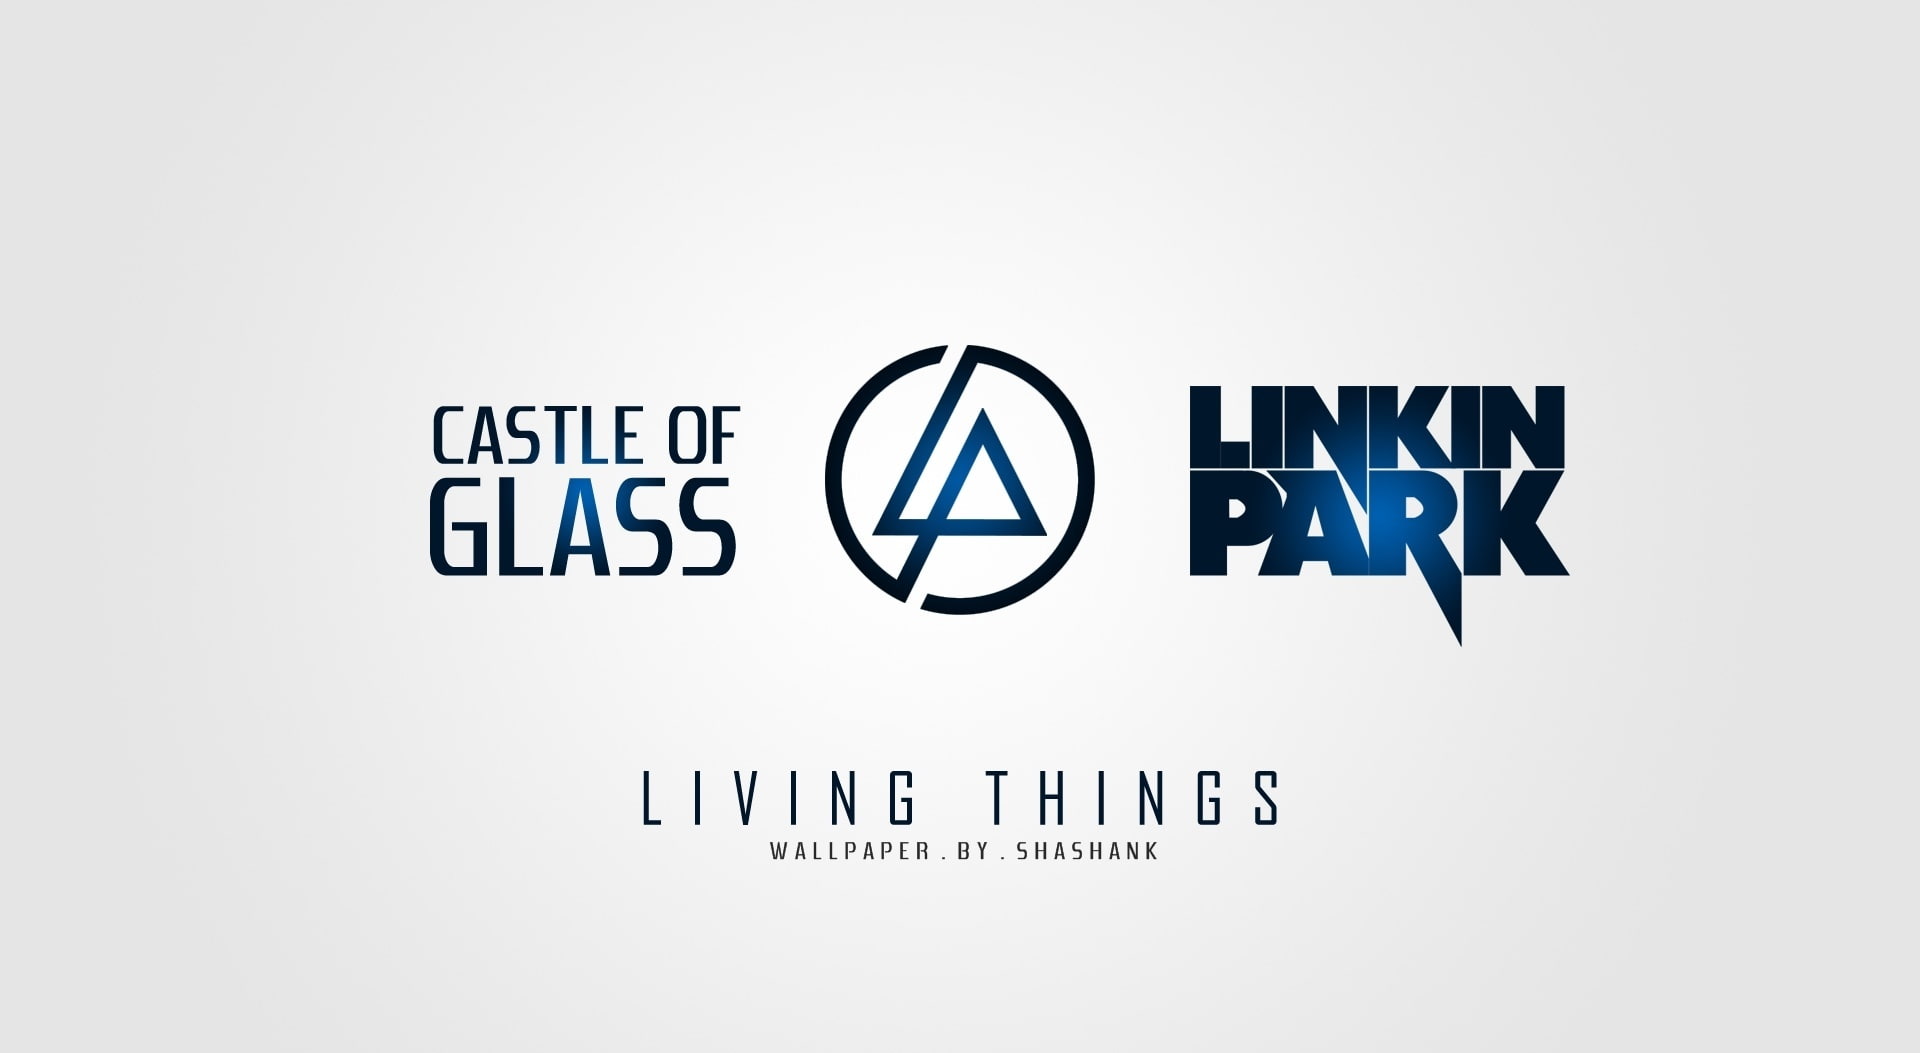 Castle Of Glass By Linkin Park, Castle of Glass Linkin Park Living Things